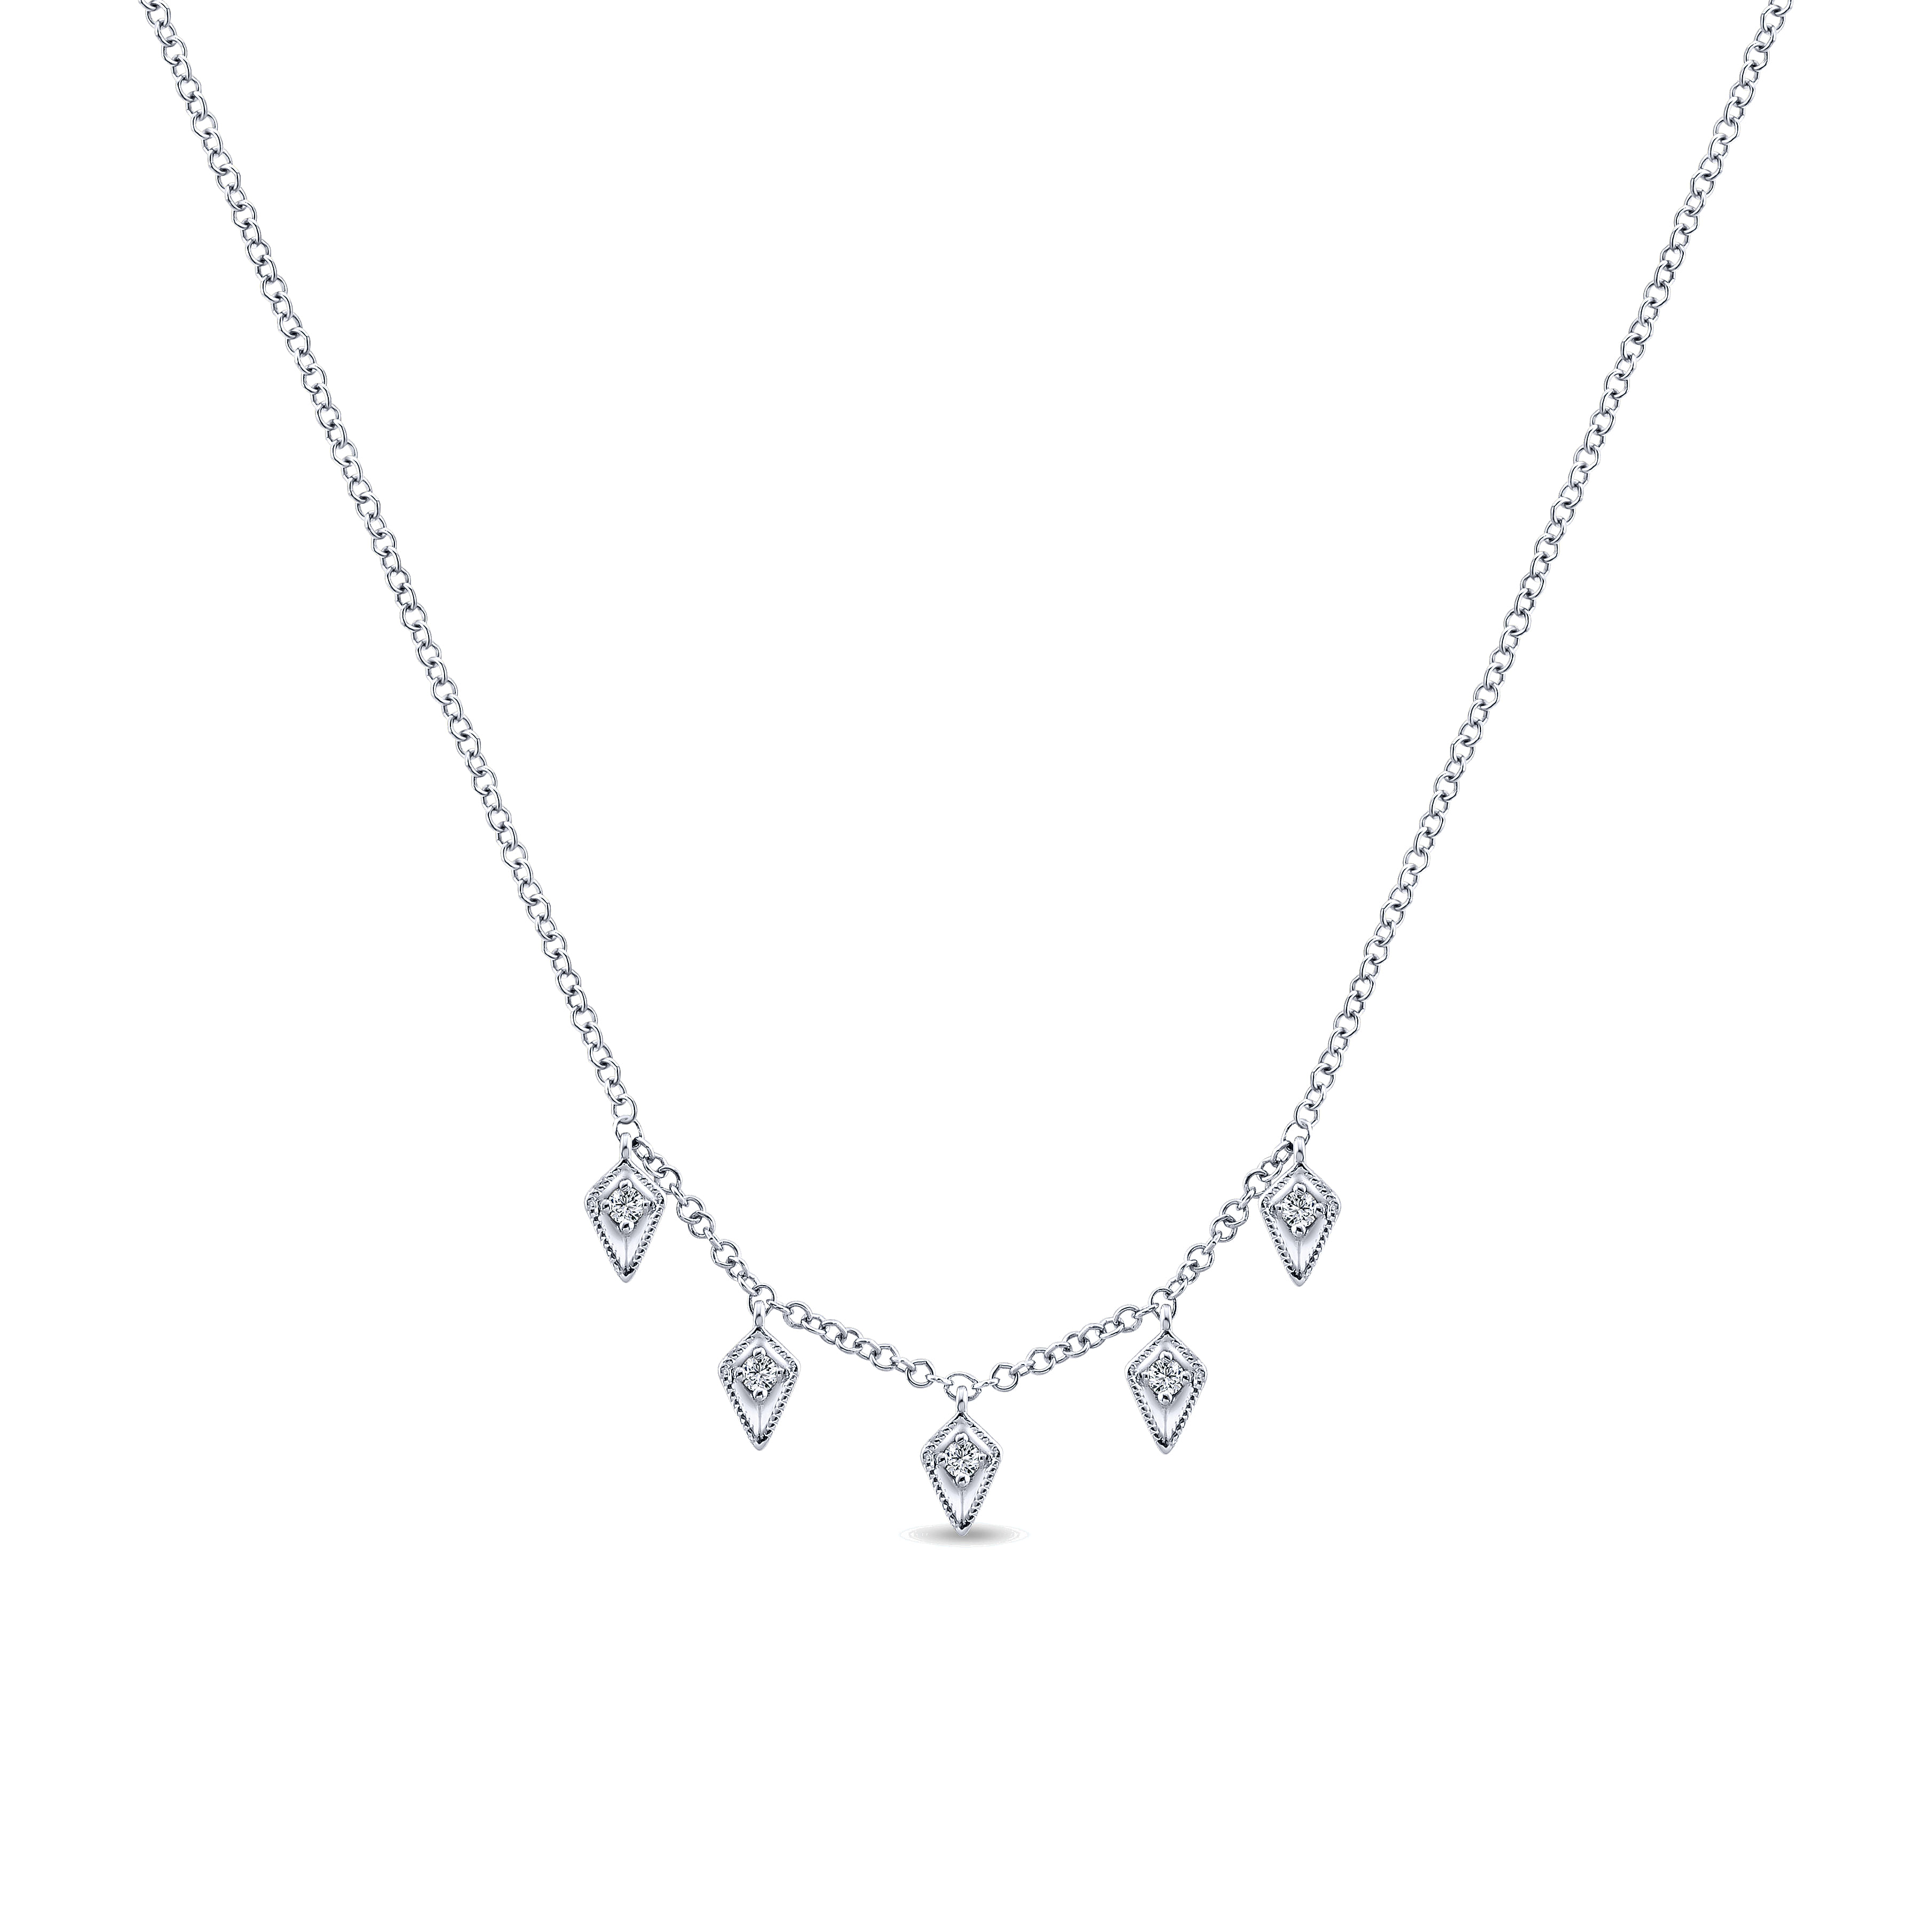 14K White Gold Kite Shaped Drops Station Necklace with Diamonds